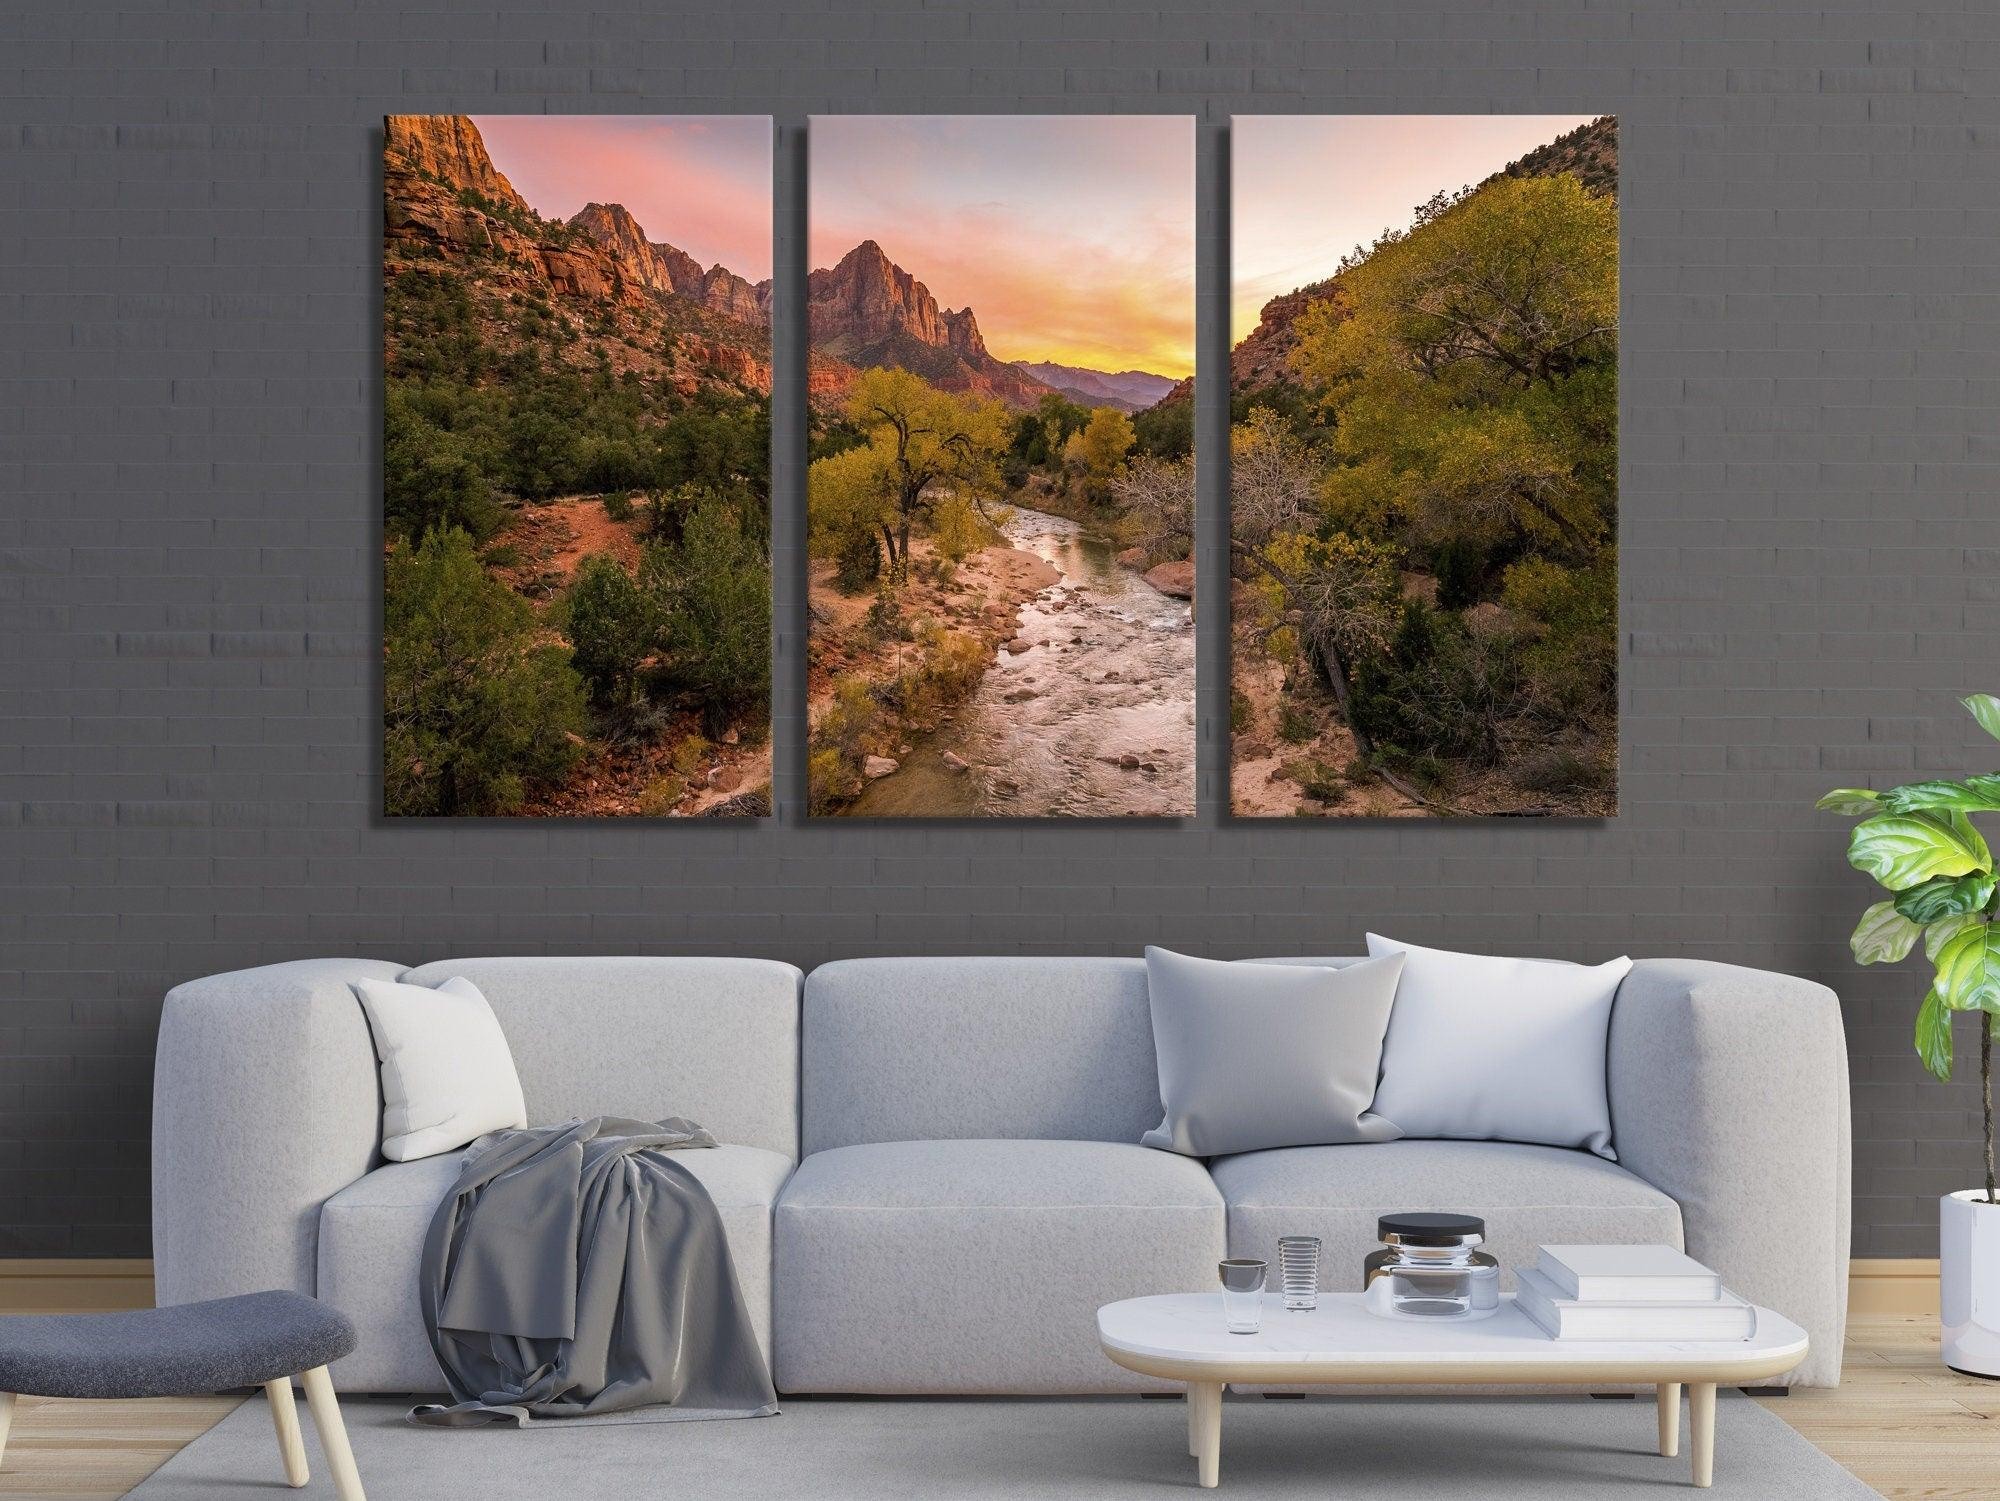 Zion National Park | 3 Piece Nature Print Mountain Wall Art, canvas wall art, Landscape Wall Art, Poster Print or Canvas, canvas painting